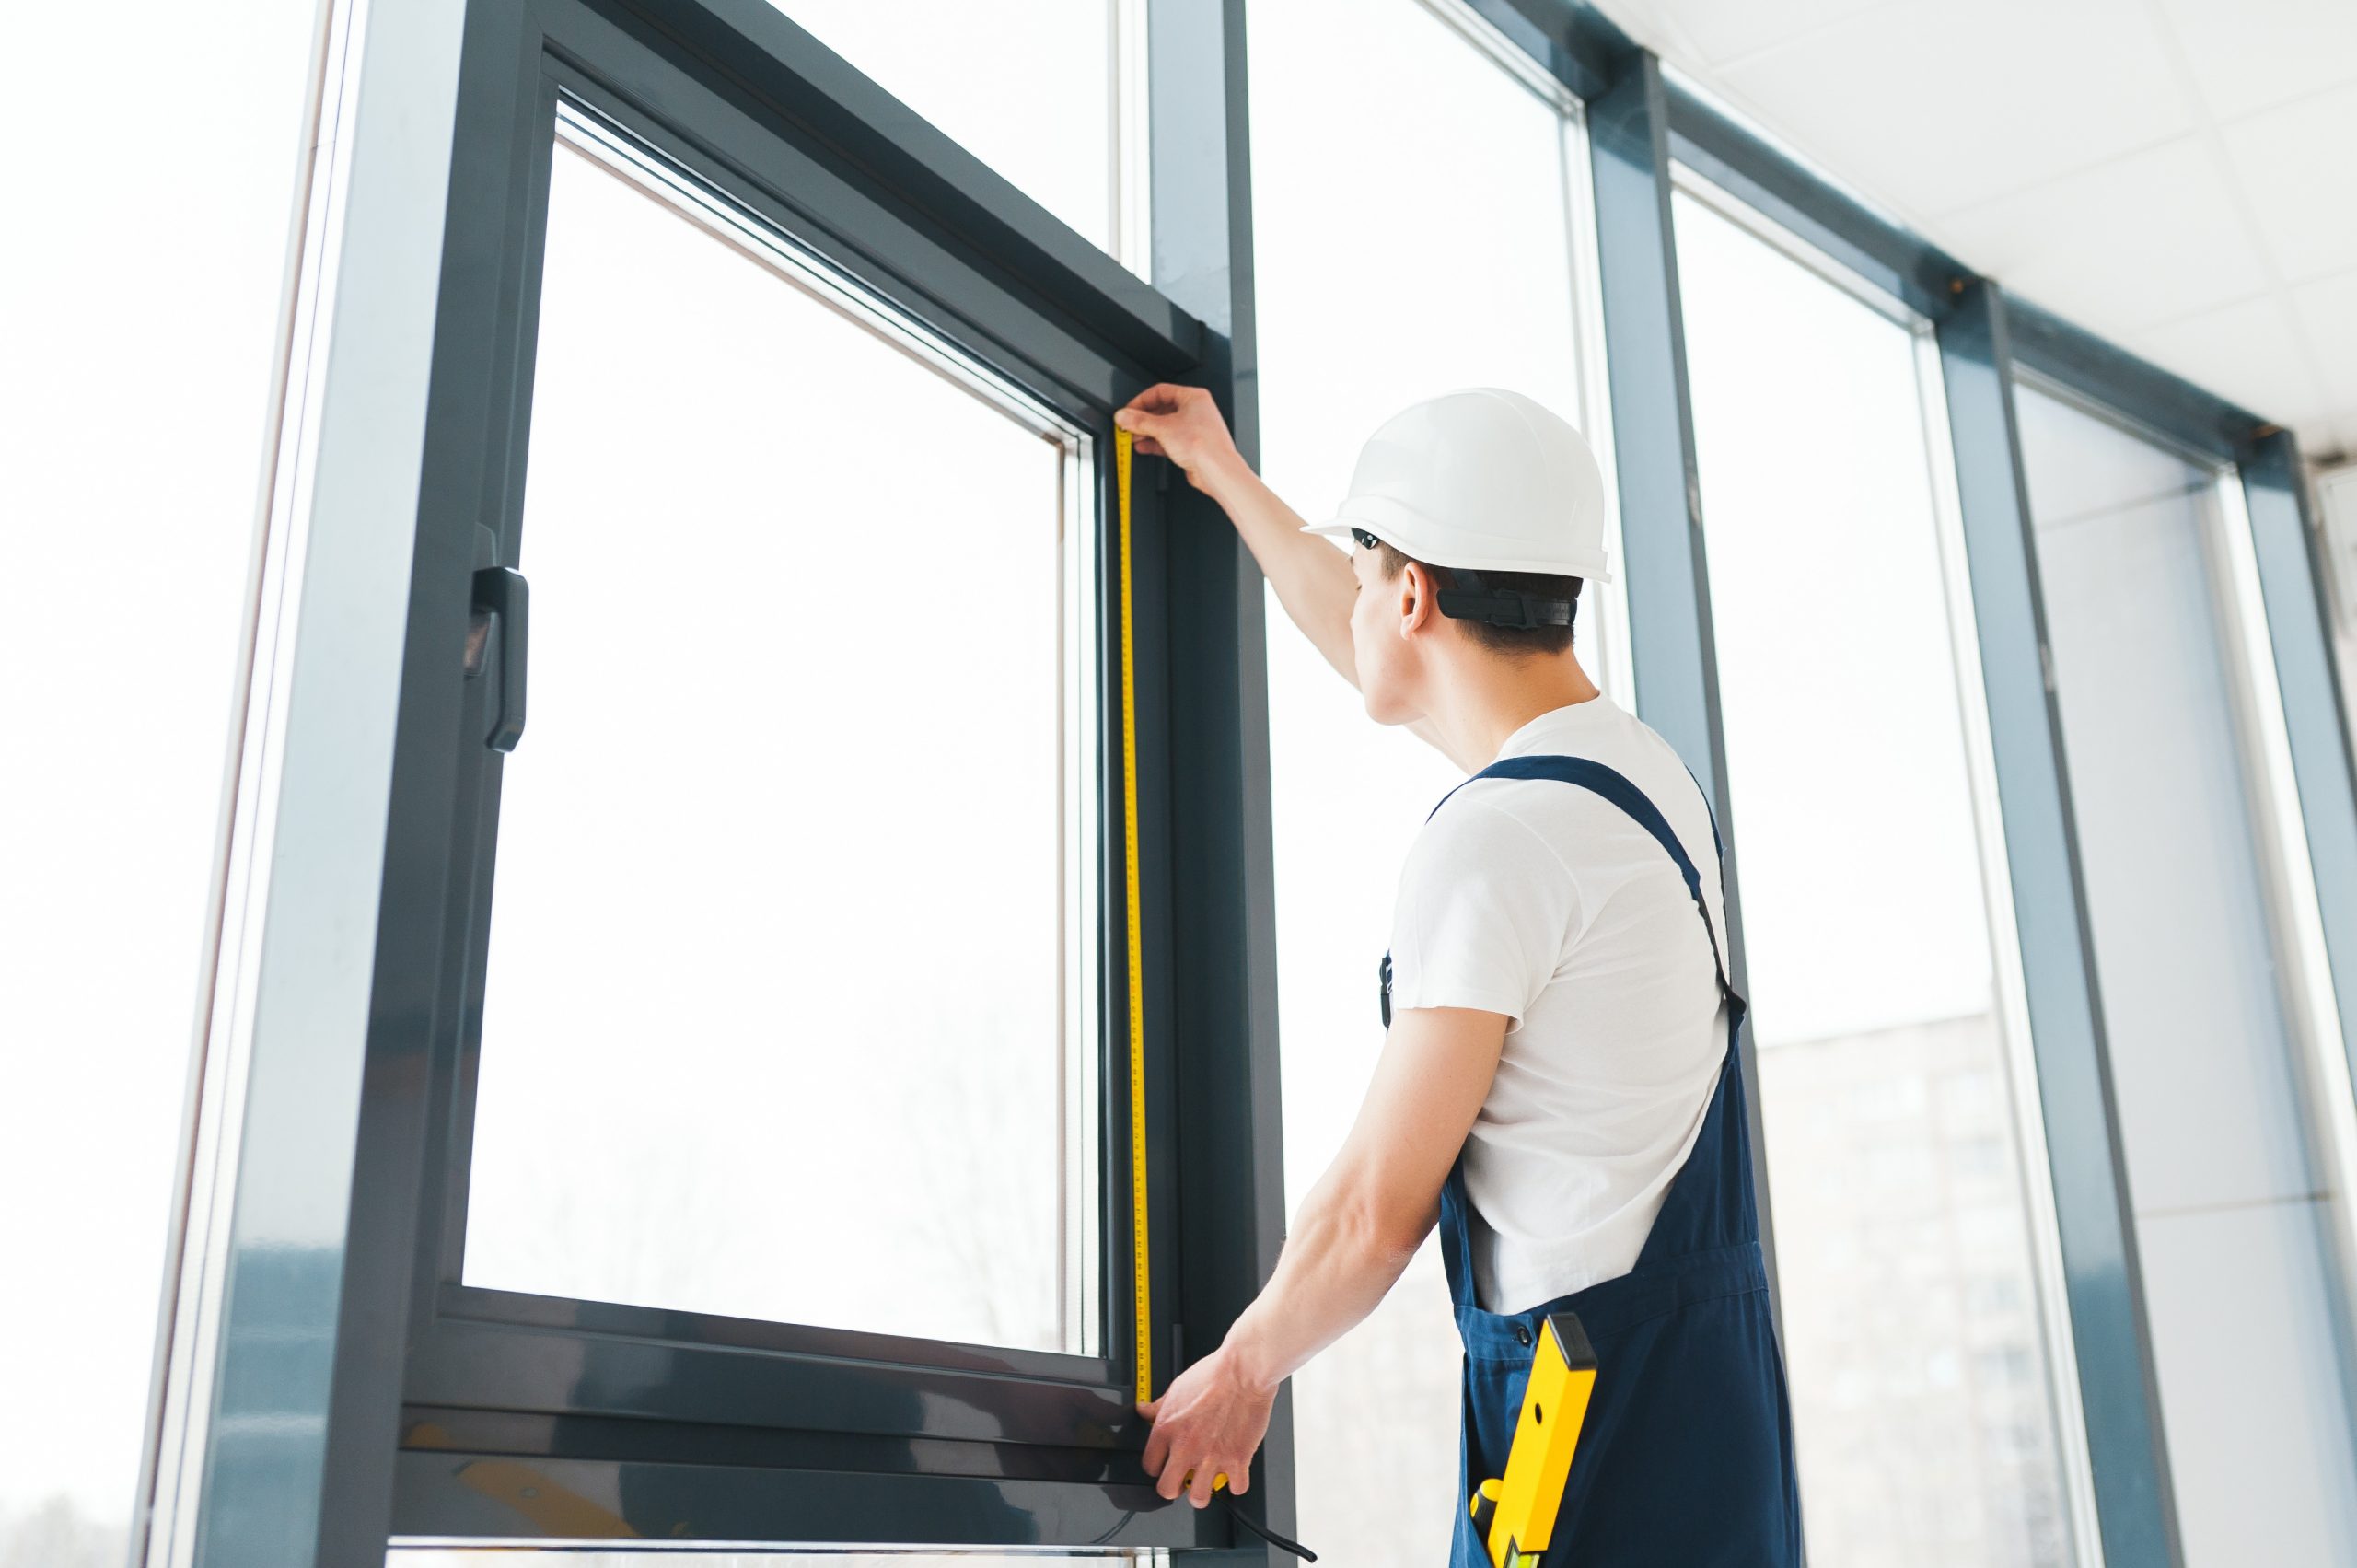 If you are Looking for the Best Replacement Windows in Palatine, Illinois